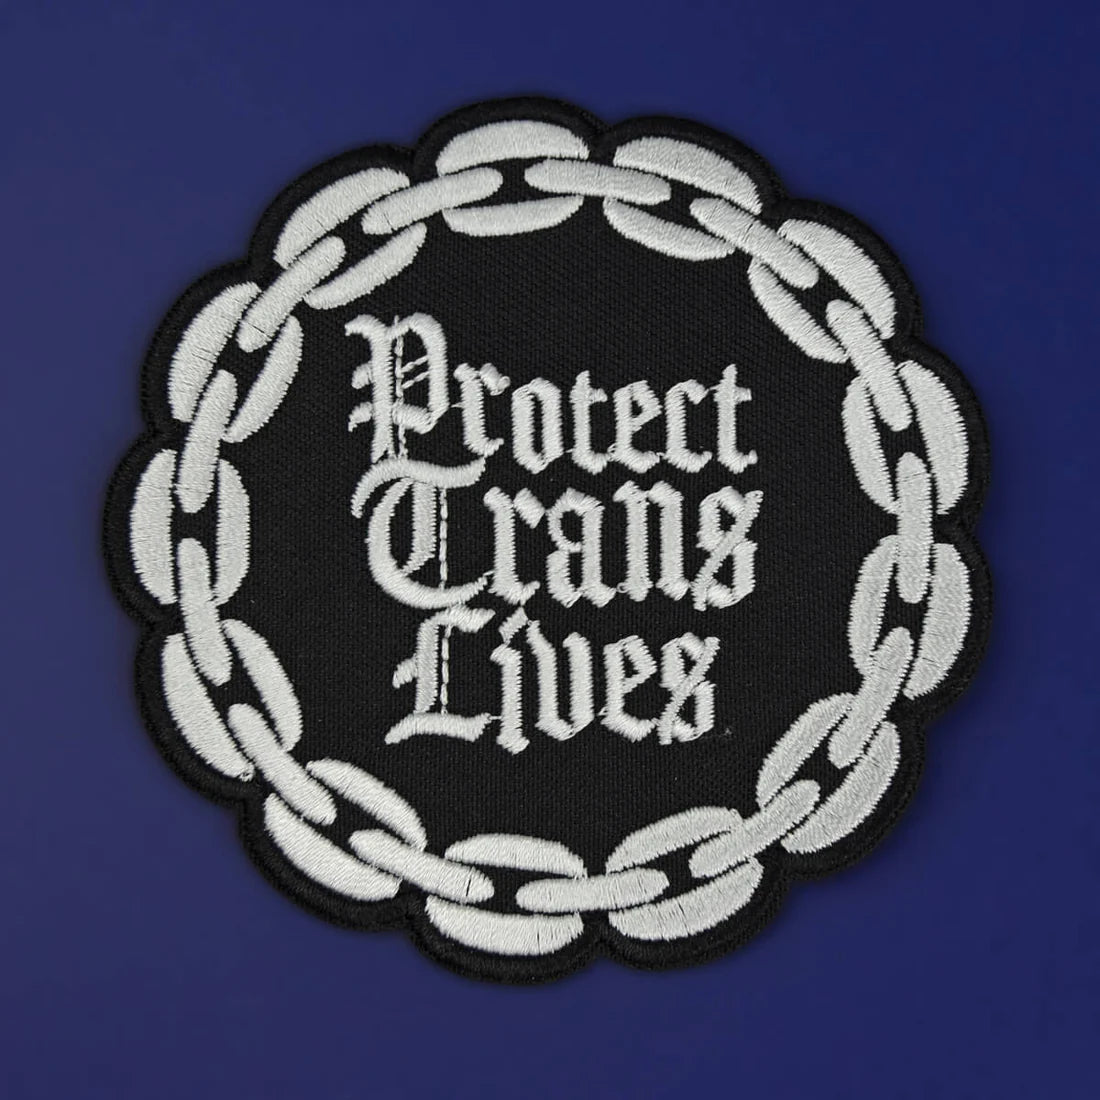 Protect trans lives gothic - Patch - Extreme Largeness